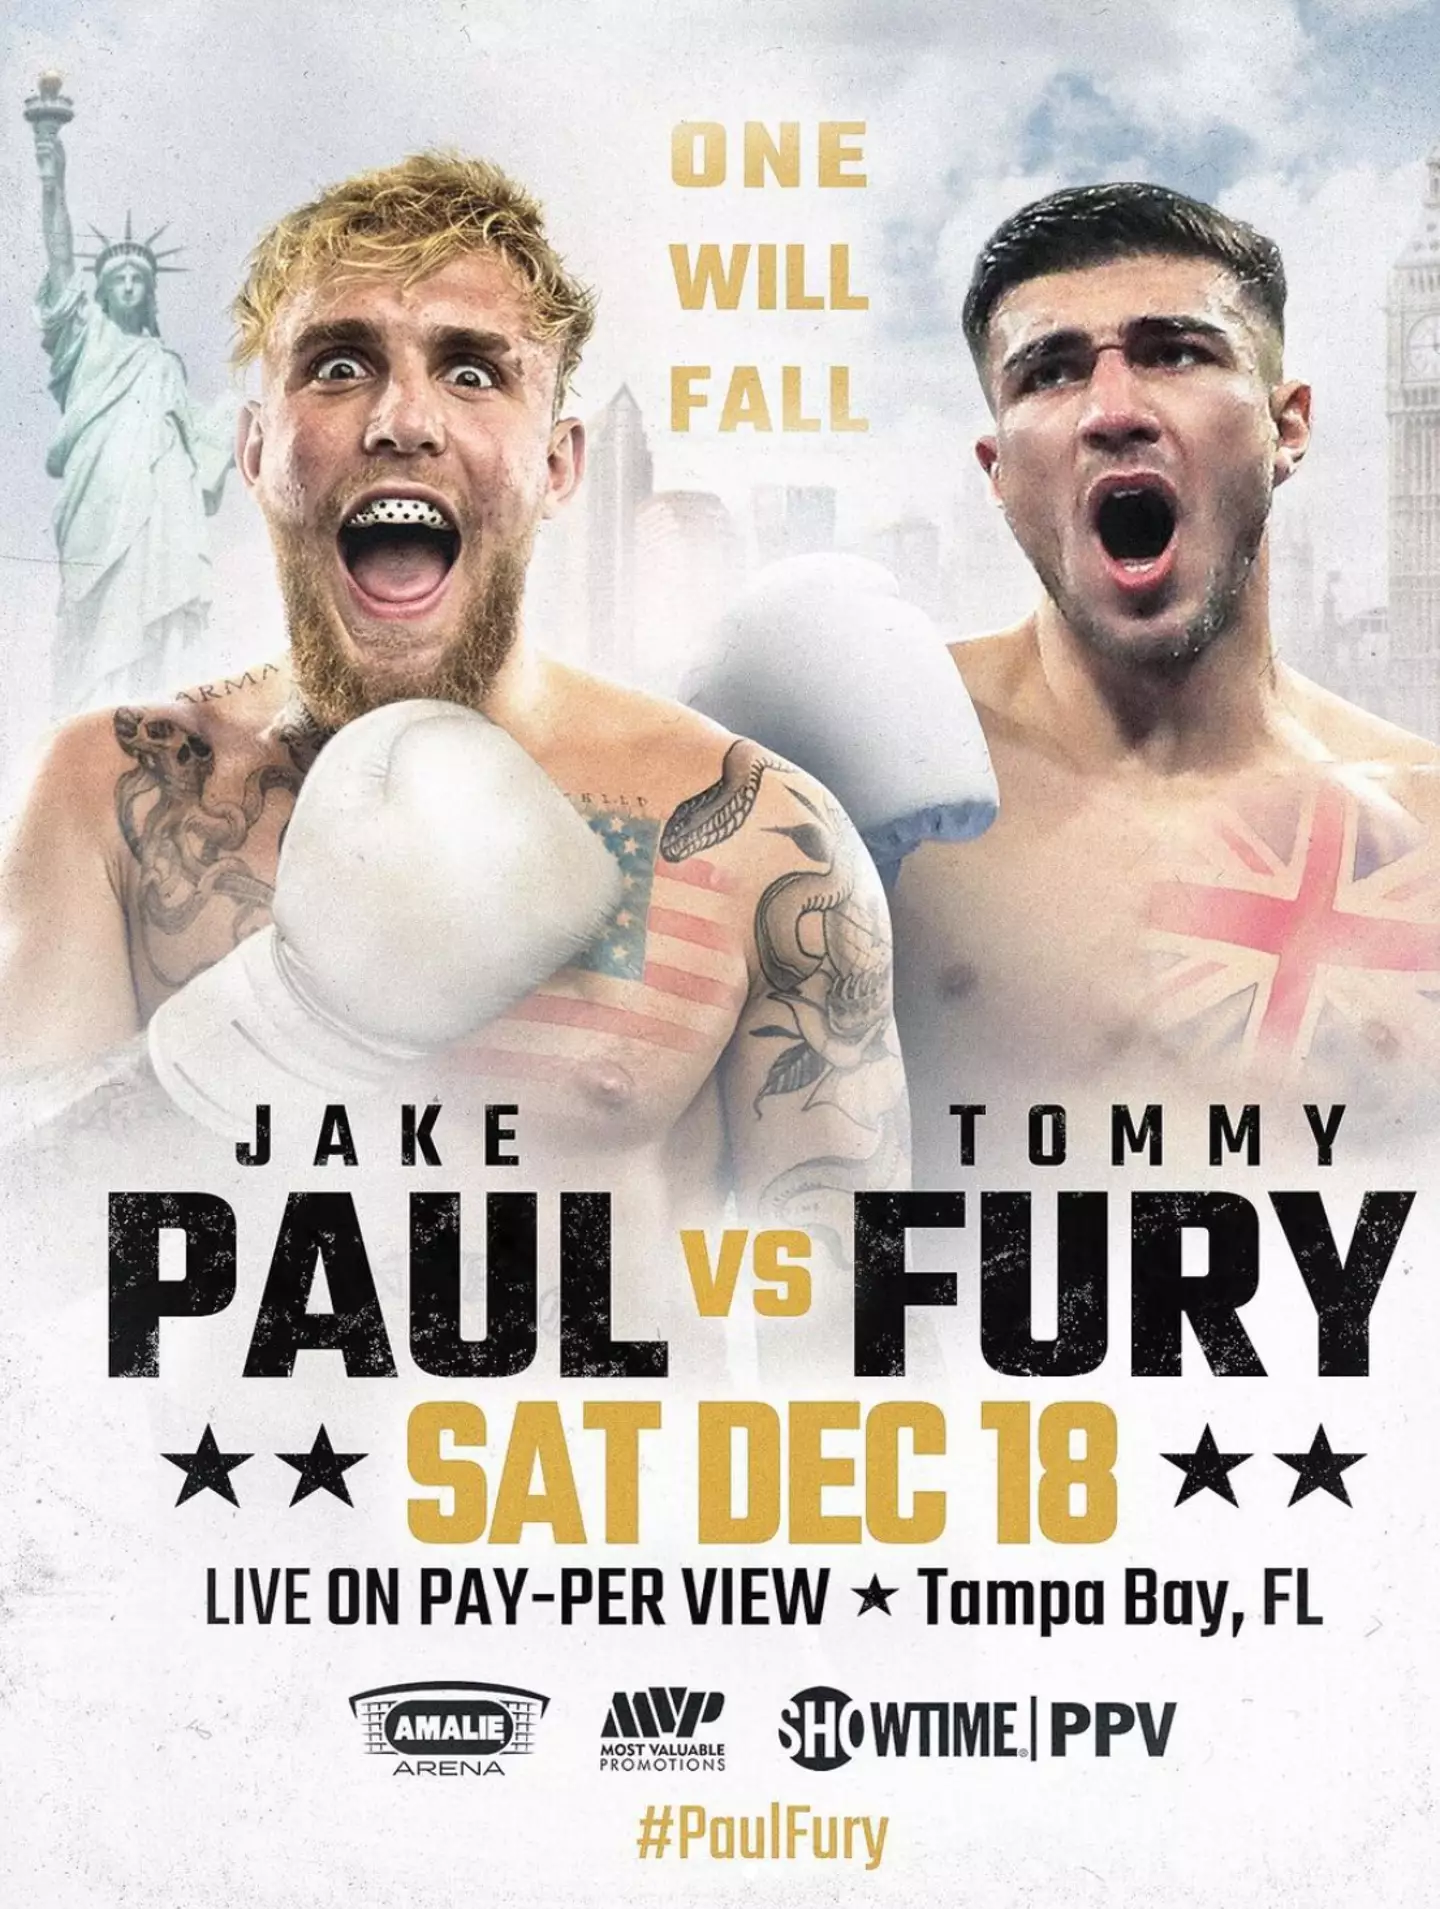 Paul will take on Tommy Fury on 18 December in a highly anticipated fight.